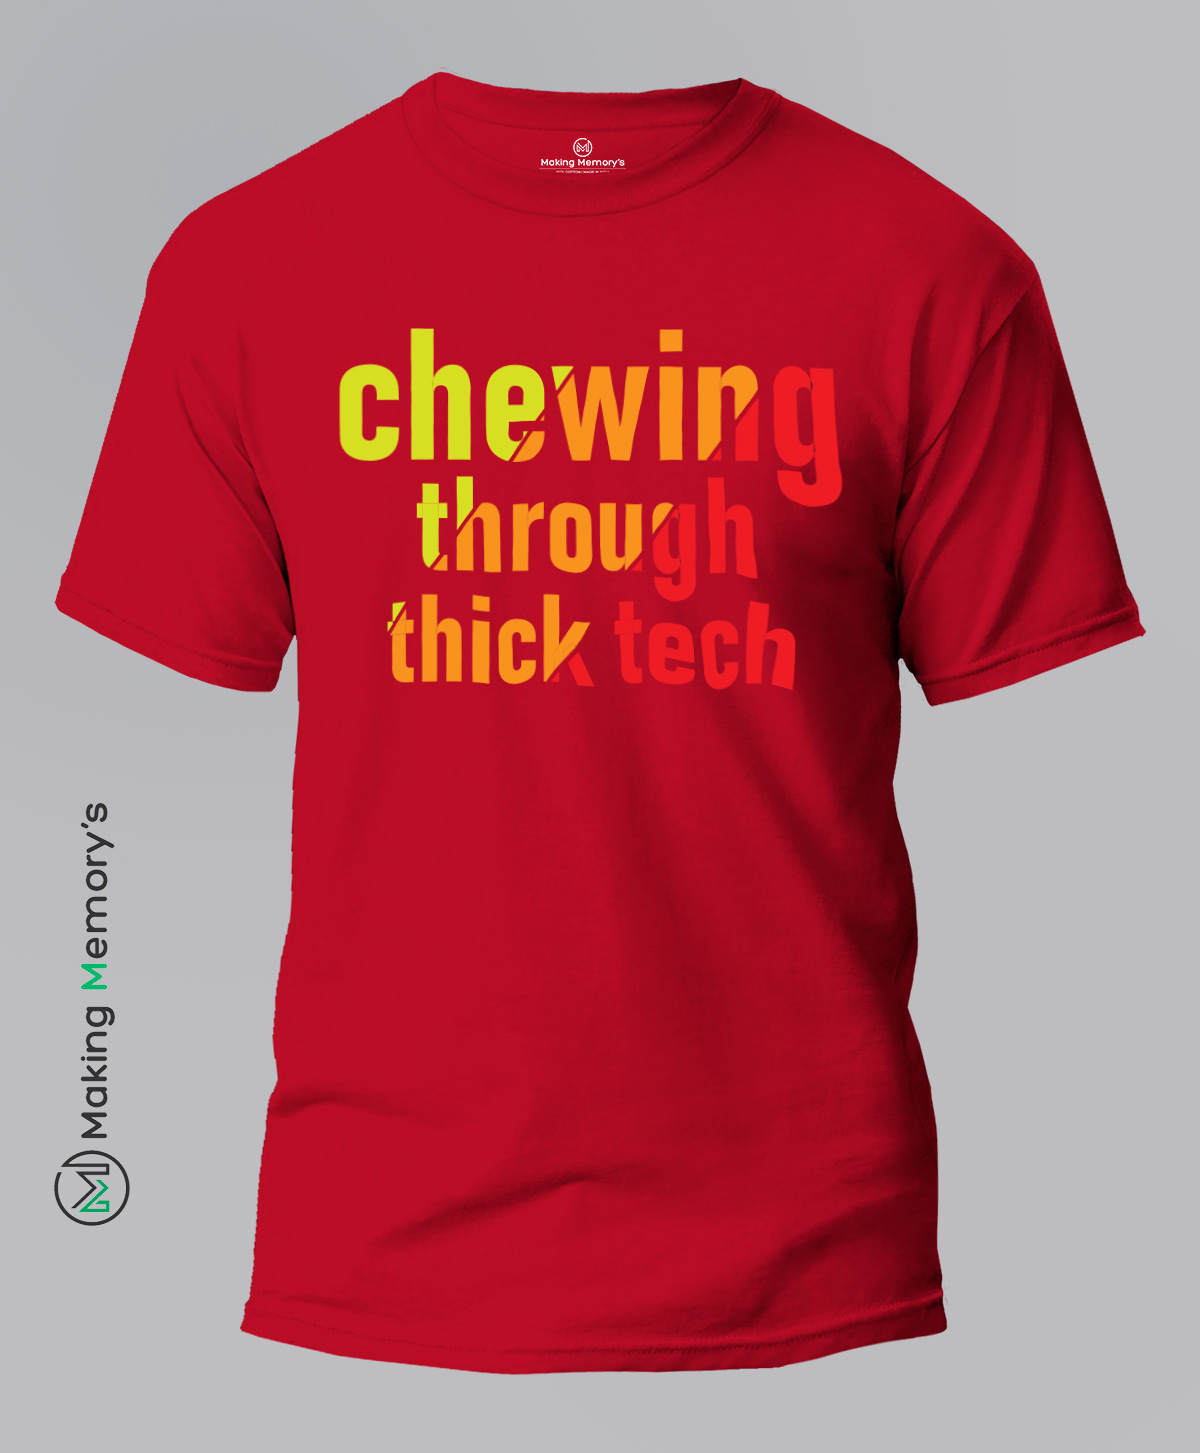 Chewing-Through-Thick-Tech-Red-T-Shirt